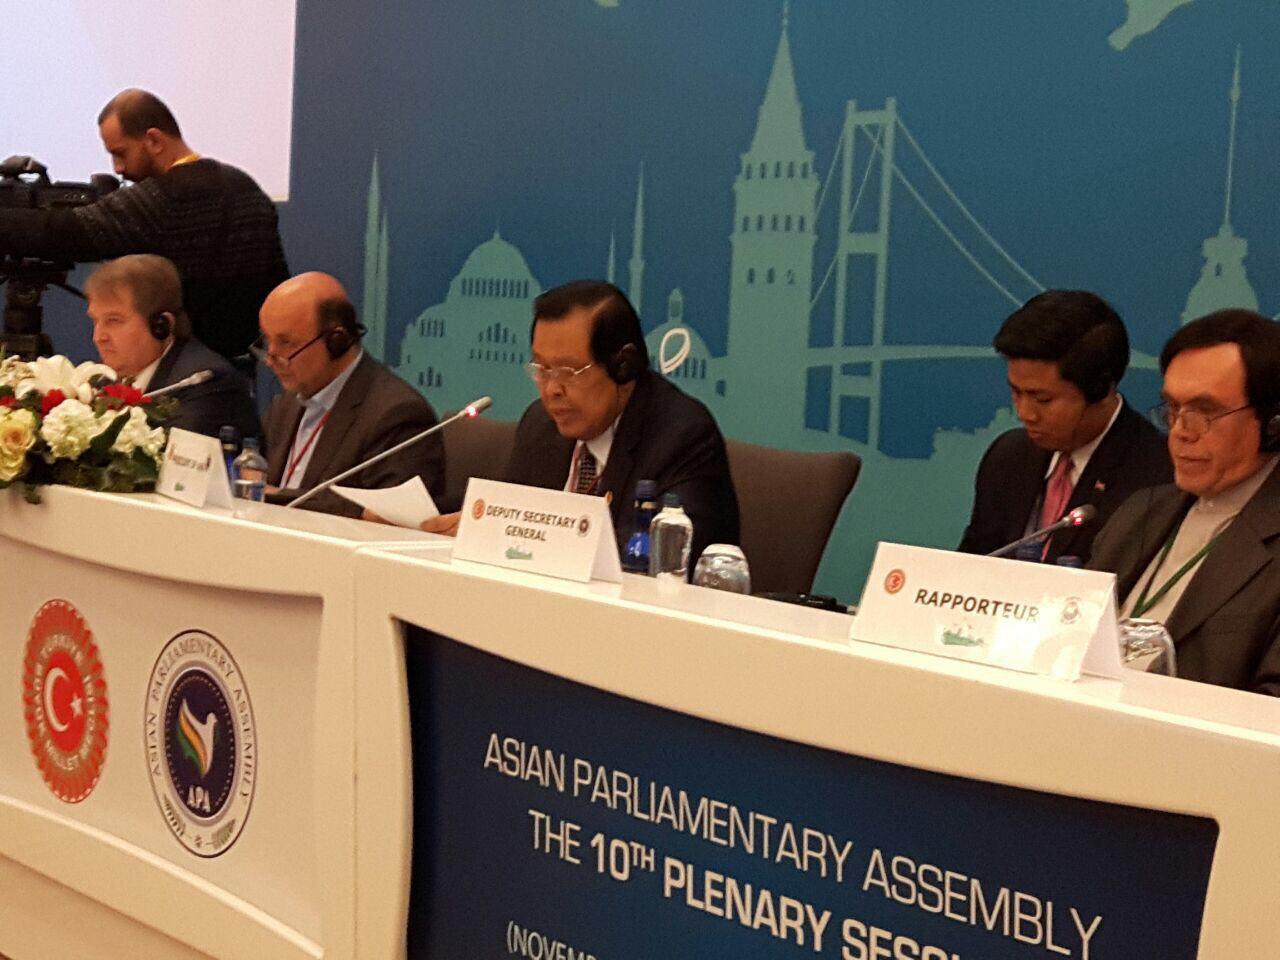 Second Meeting of APA's Executive Council in 2017 Held in Istanbul